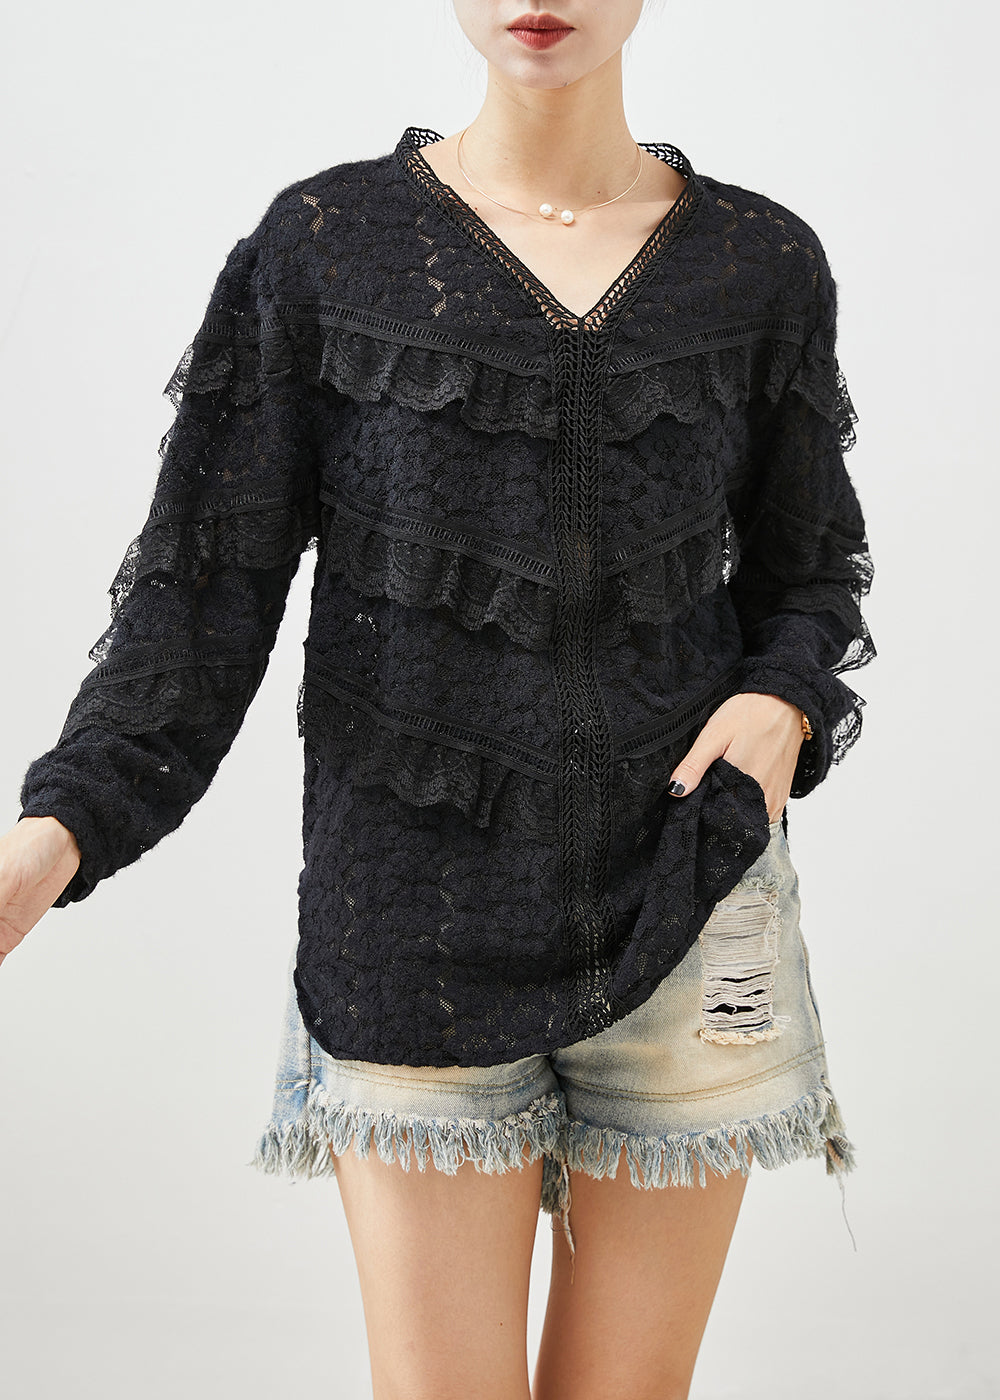 Style Black V Neck Patchwork Ruffles Lace Shirt Tops Fall